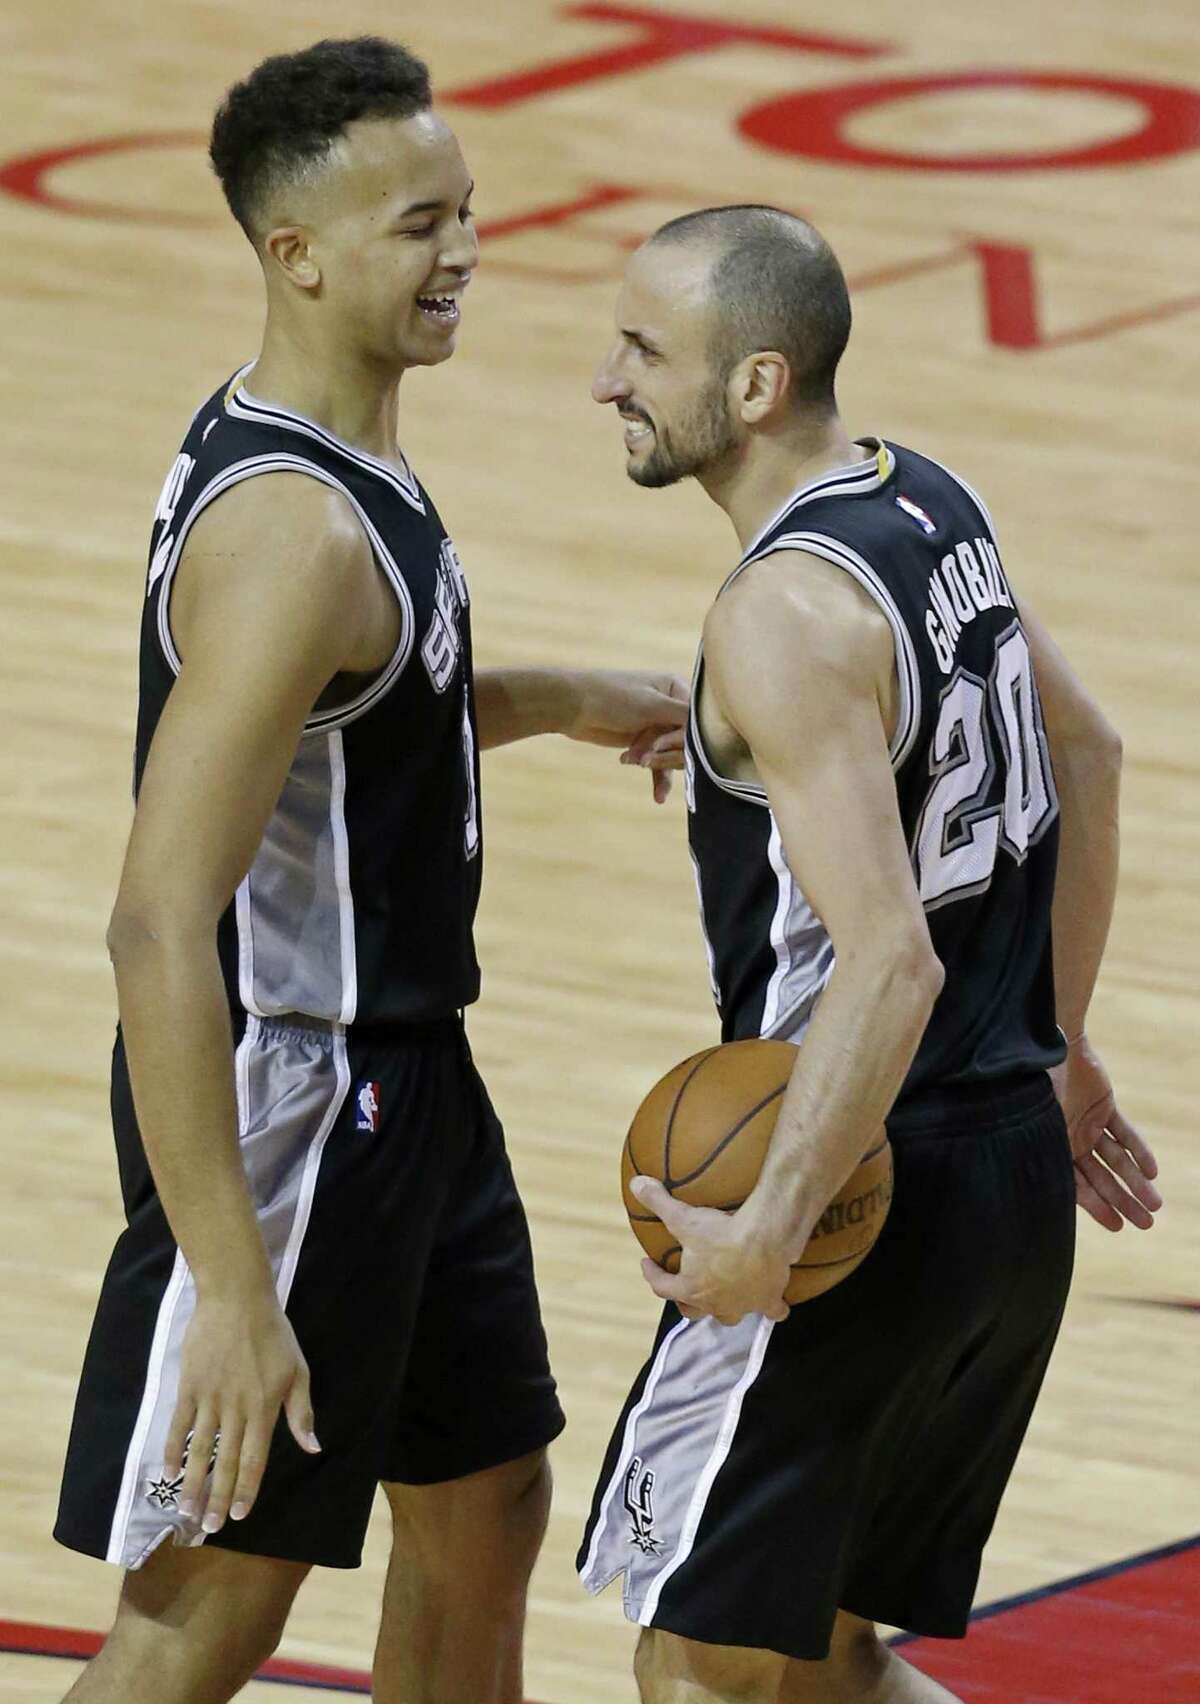 Spurs’ Kyle Anderson (left) and Manu Ginobili react after a play during second half action of Game 6 against the Rockets in the Western Conference semifinals on May 11, 2017 at the Toyota Center in Houston.